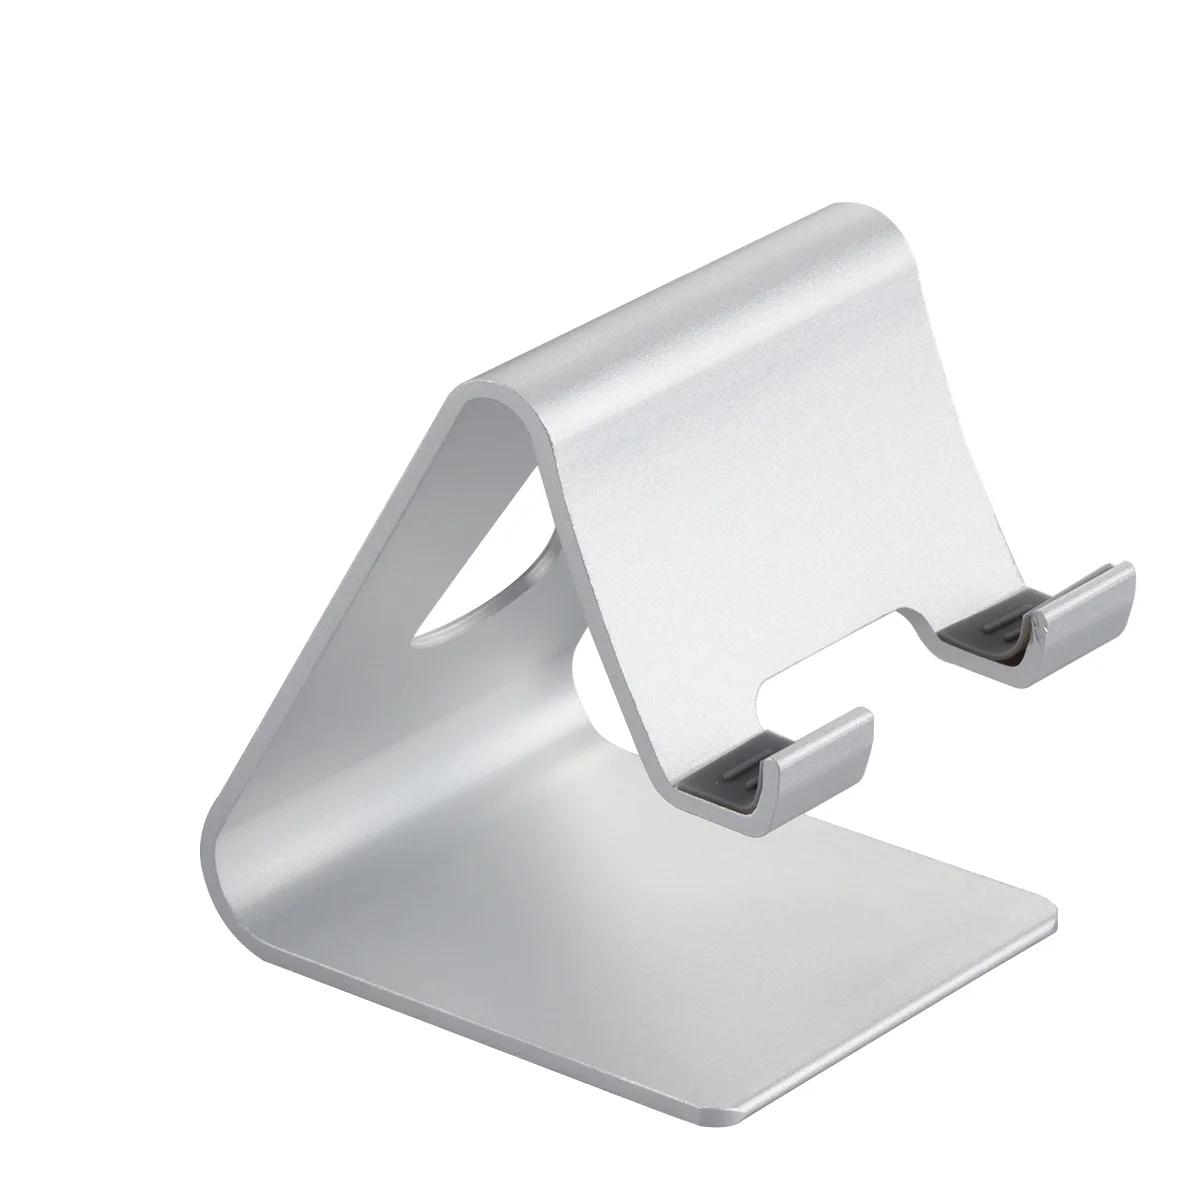 Universal Desktop Support Holder Tablet Phone Stand Metal Aluminum Alloy Stand for Tablets and Others (Silver)